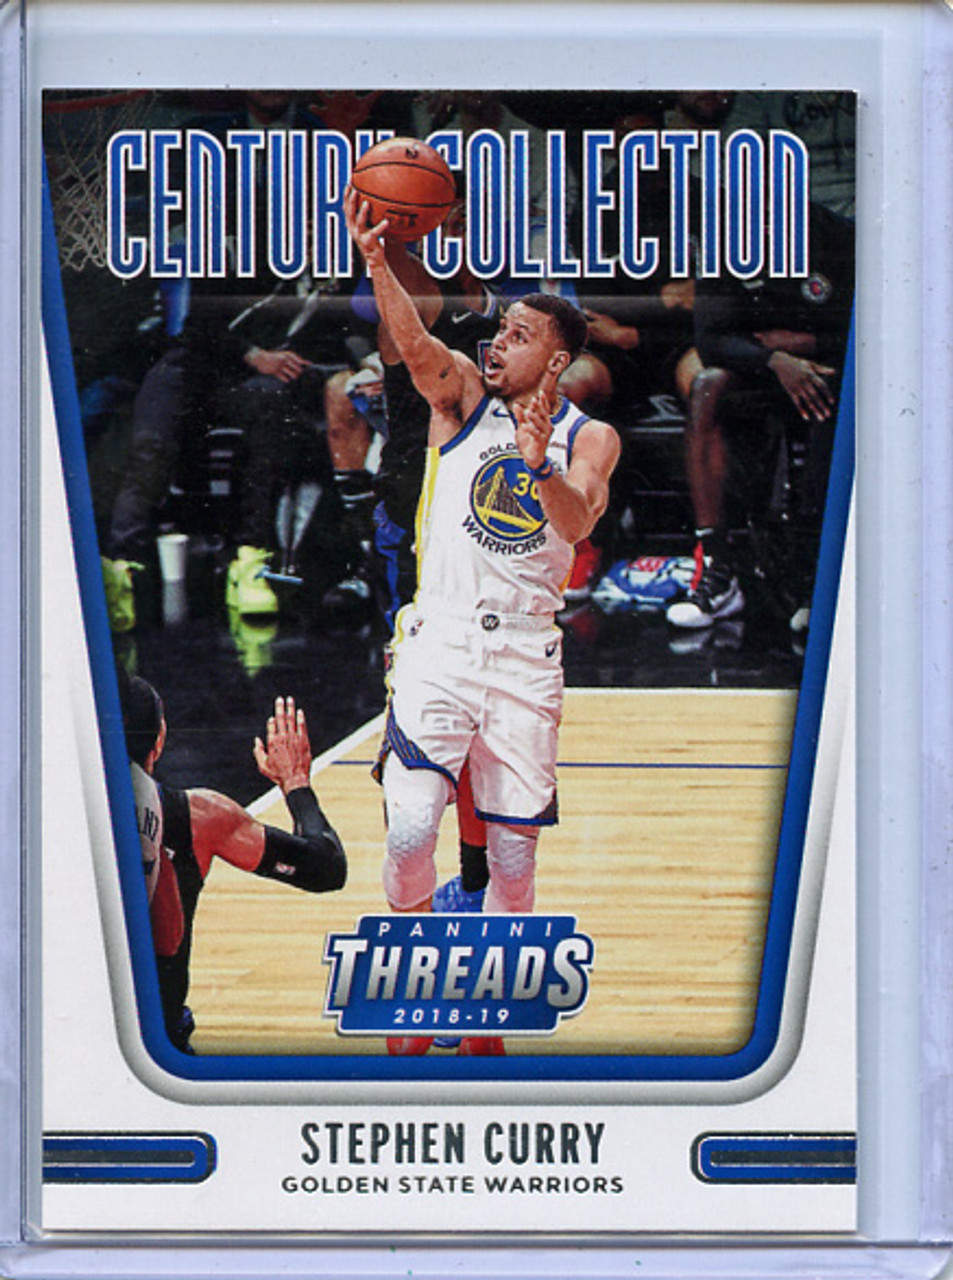 Stephen Curry 2018-19 Threads, Century Collection #19